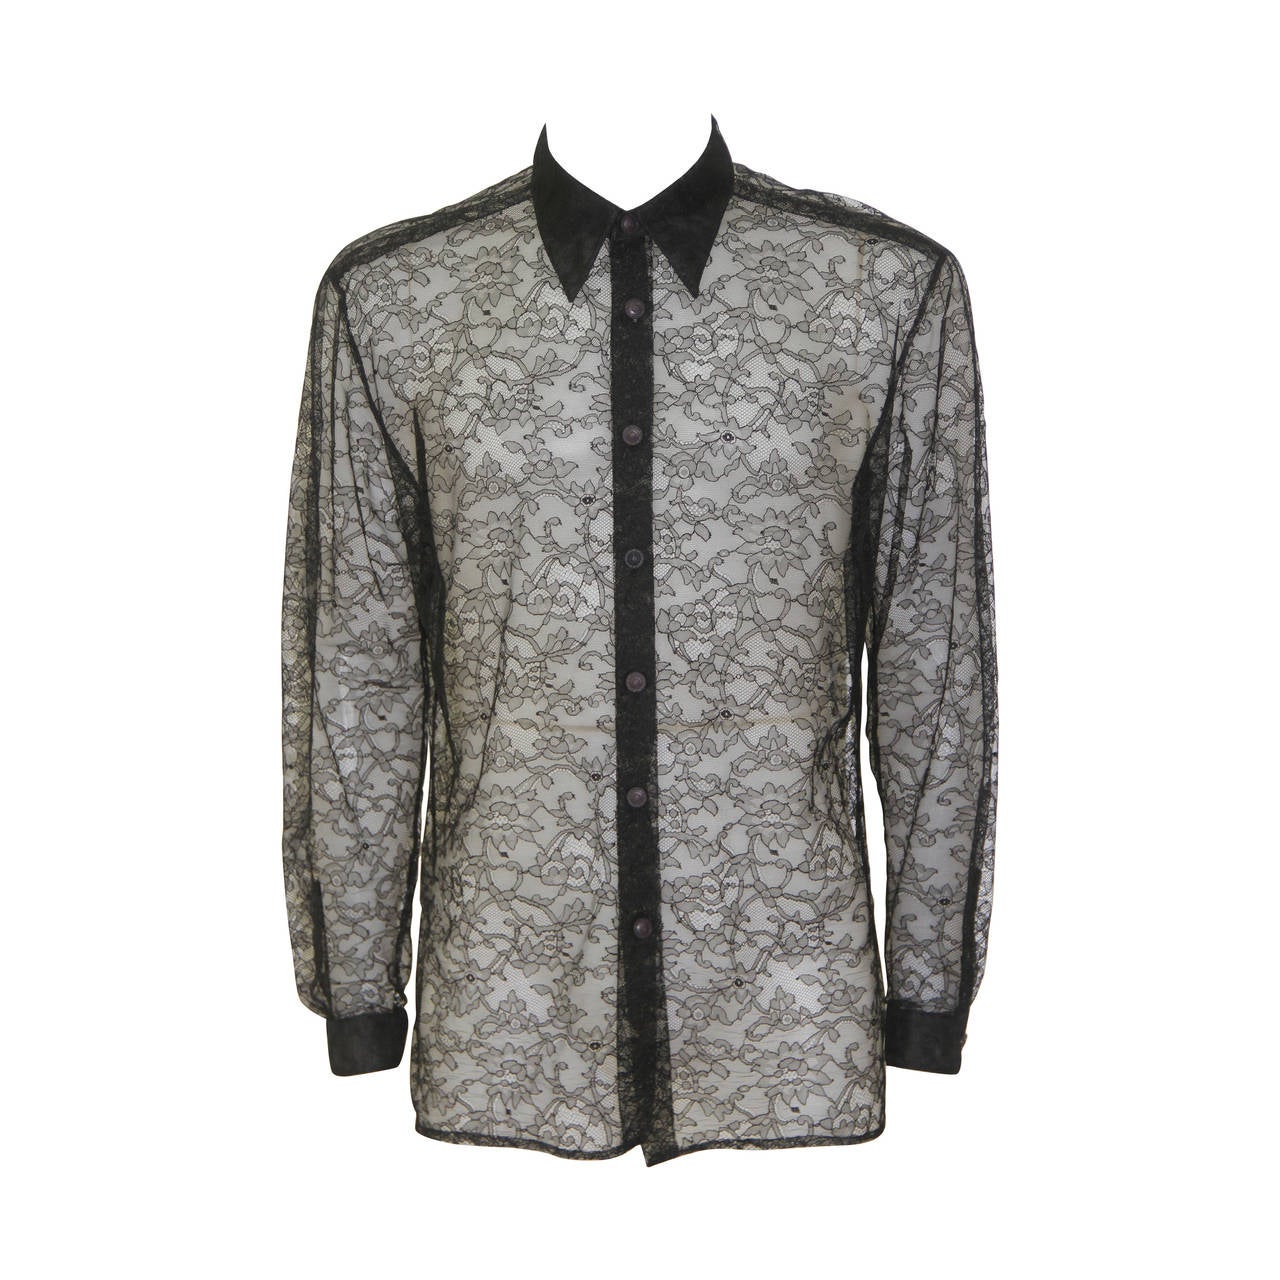 Iconic Gianni Versace Silk Lace Punk Collection Shirt Spring 1994 For Sale